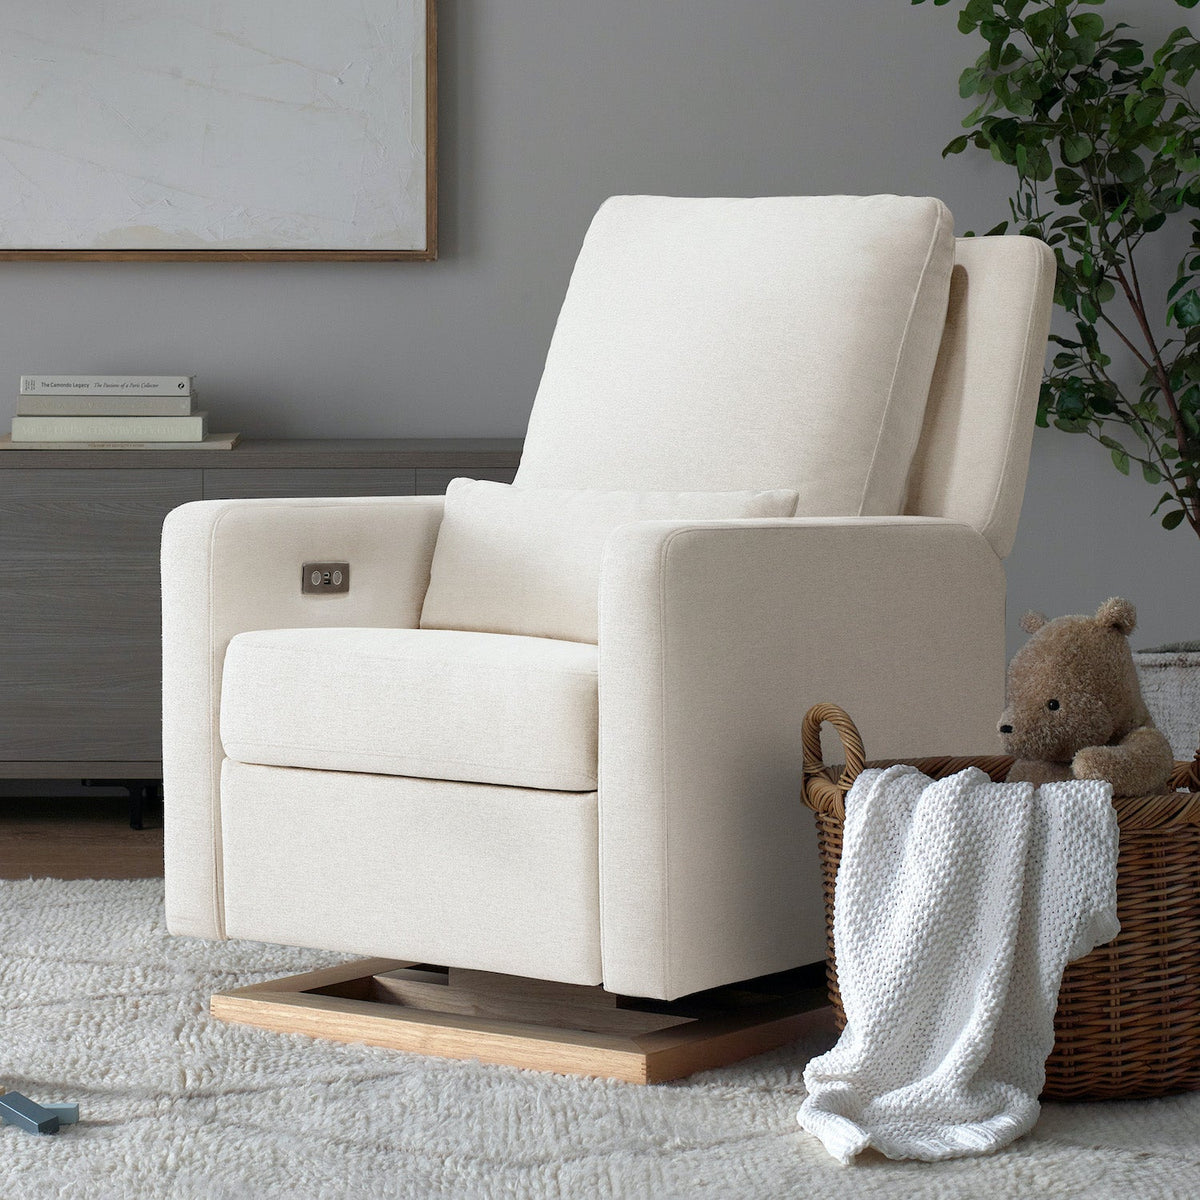 Sigi Electronic Recliner + Glider in Eco-Performance Fabric with USB Port - Project Nursery